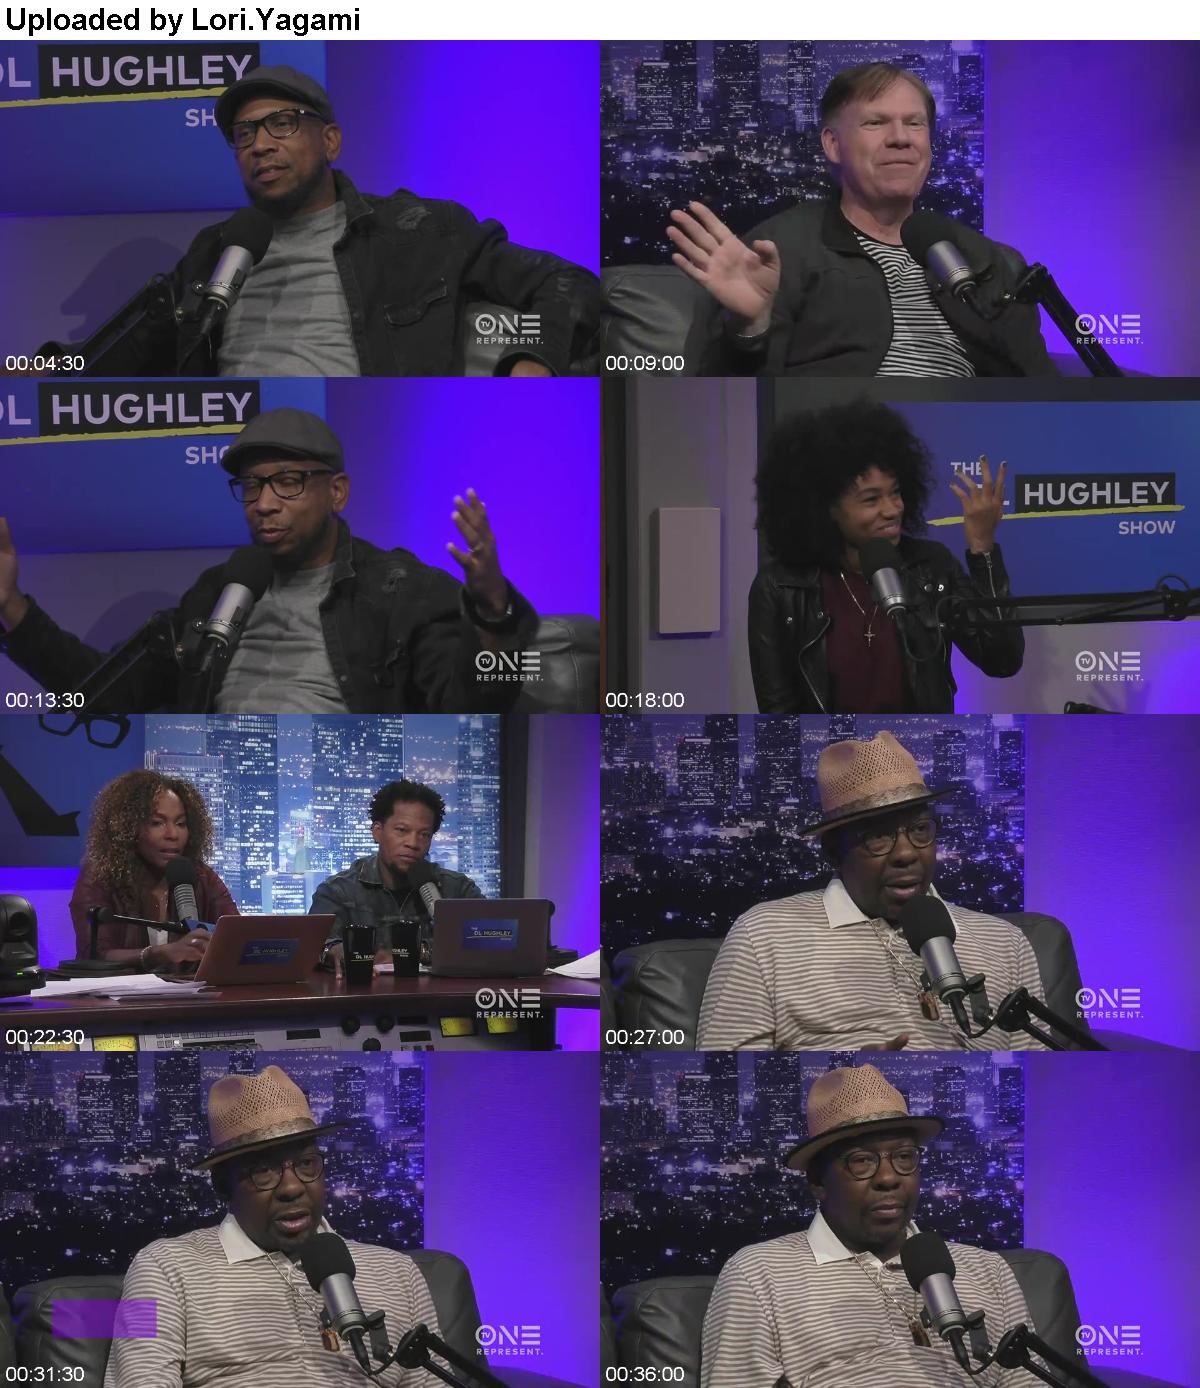 The DL Hughley Show 2019 10 21 Bobby Brown WEB H264-COOKIEMONSTER